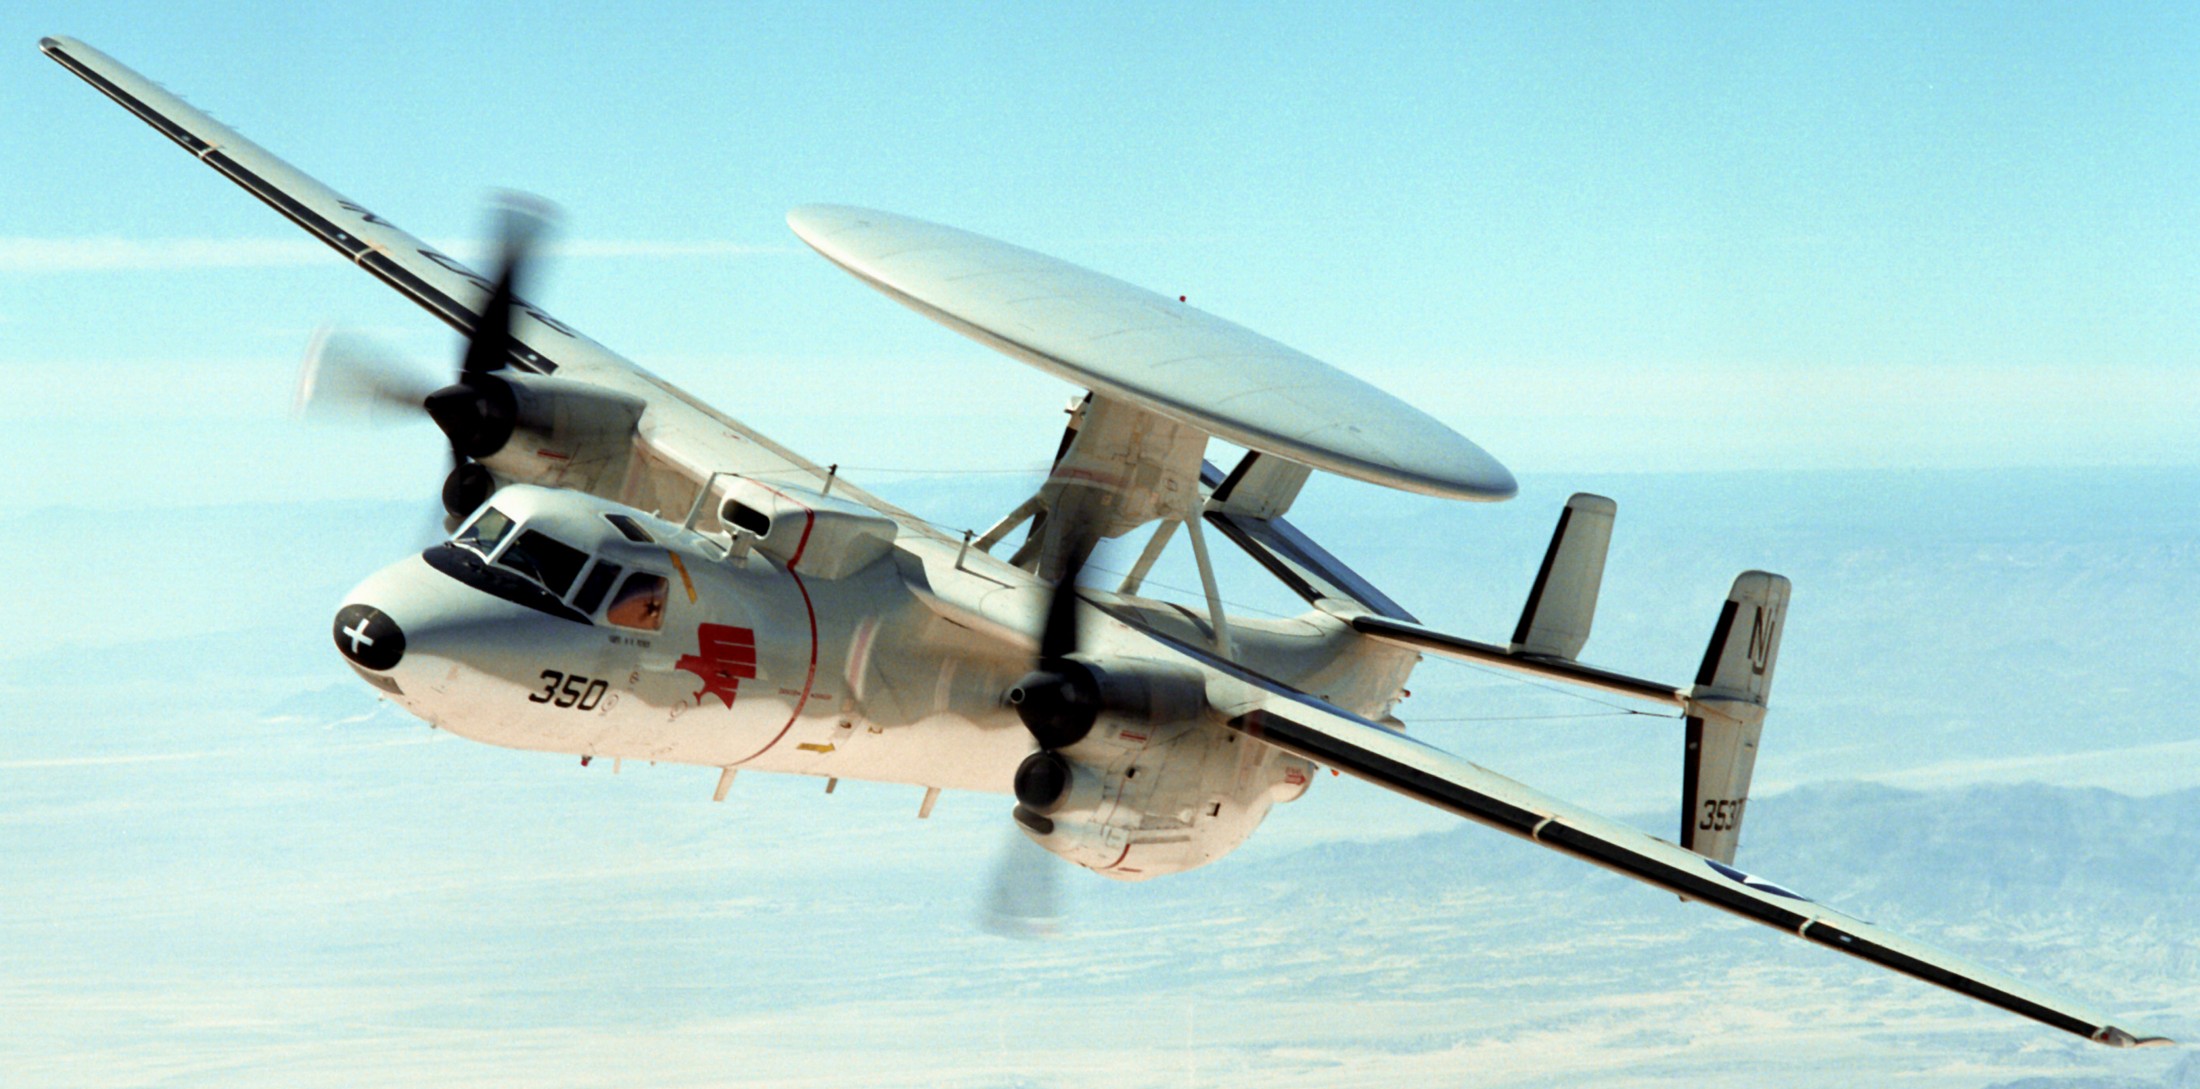 vaw-110 firebirds carrier airborne early warning squadron us navy reserve rcvw-12 grumman e-2c hawkeye 09 fleet replacement frs